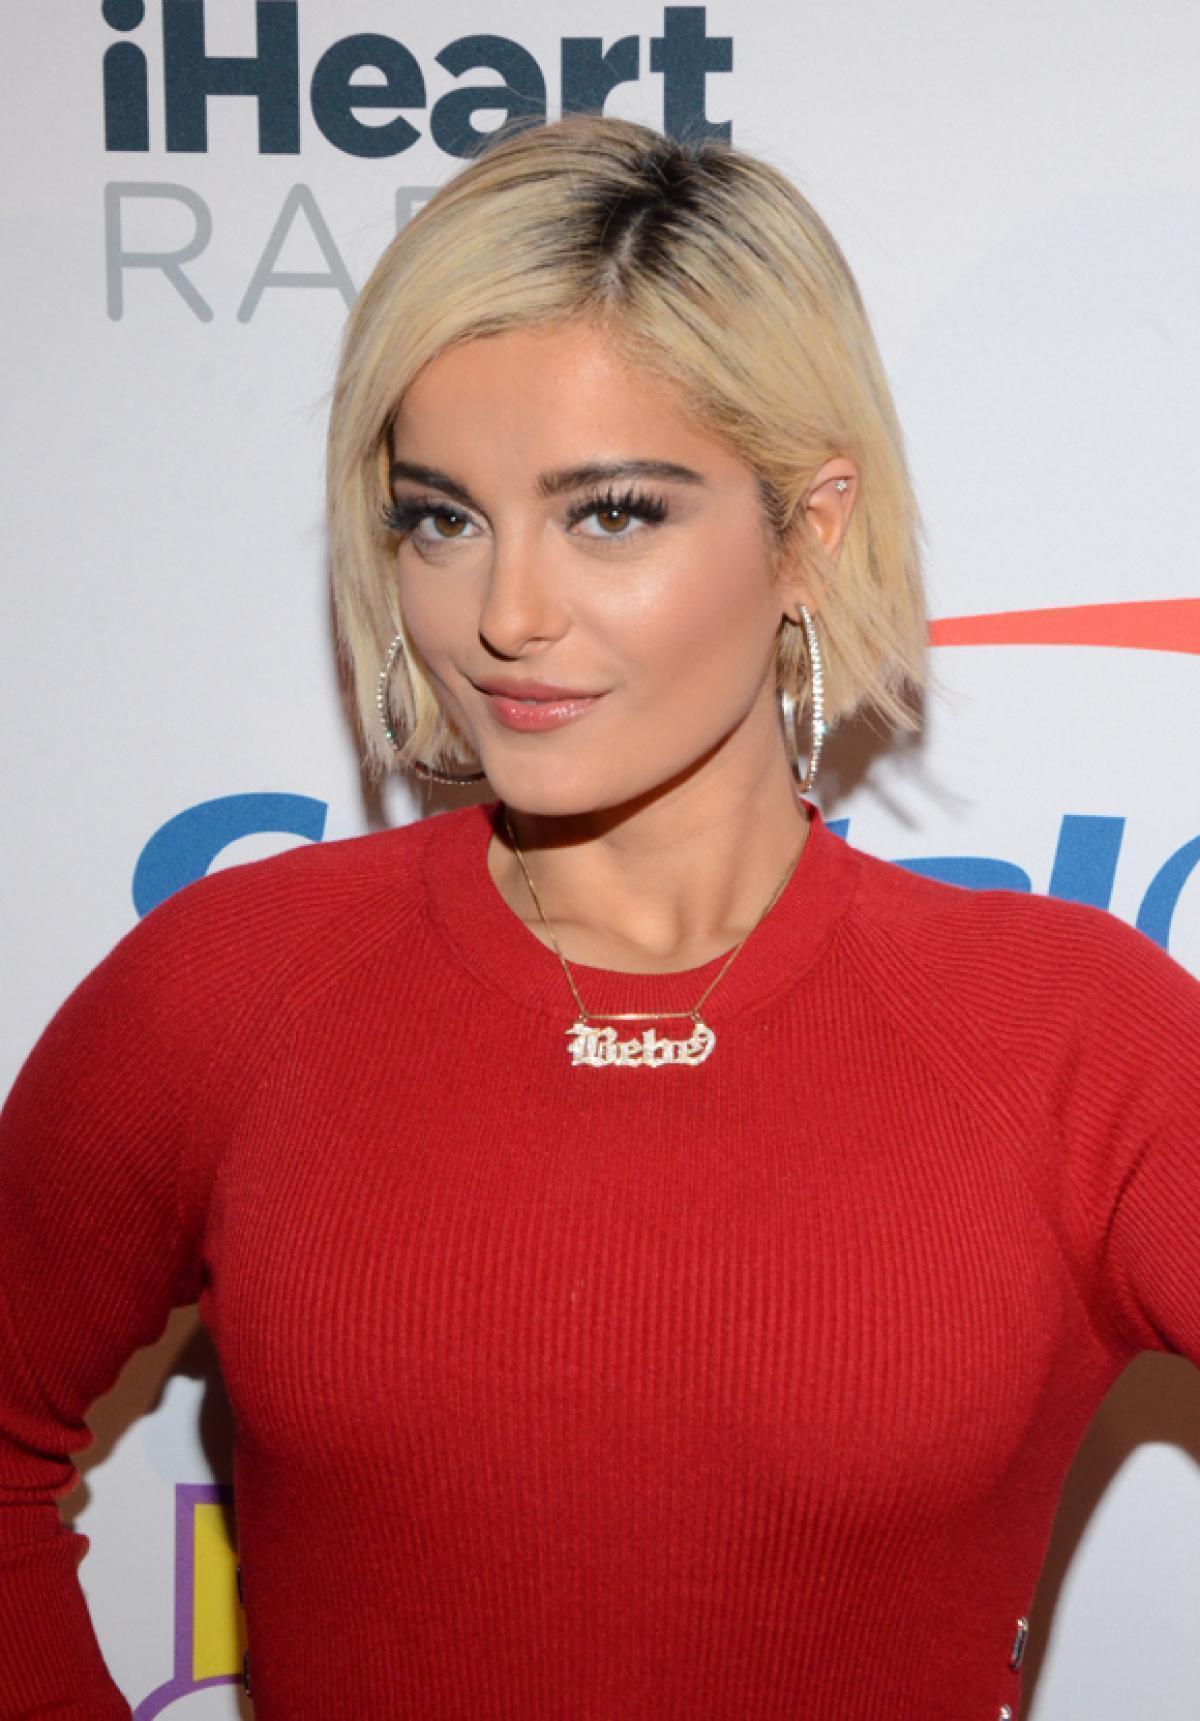 Bebe Rexha Receives Multiple Dress Offers After Blasting Designers For